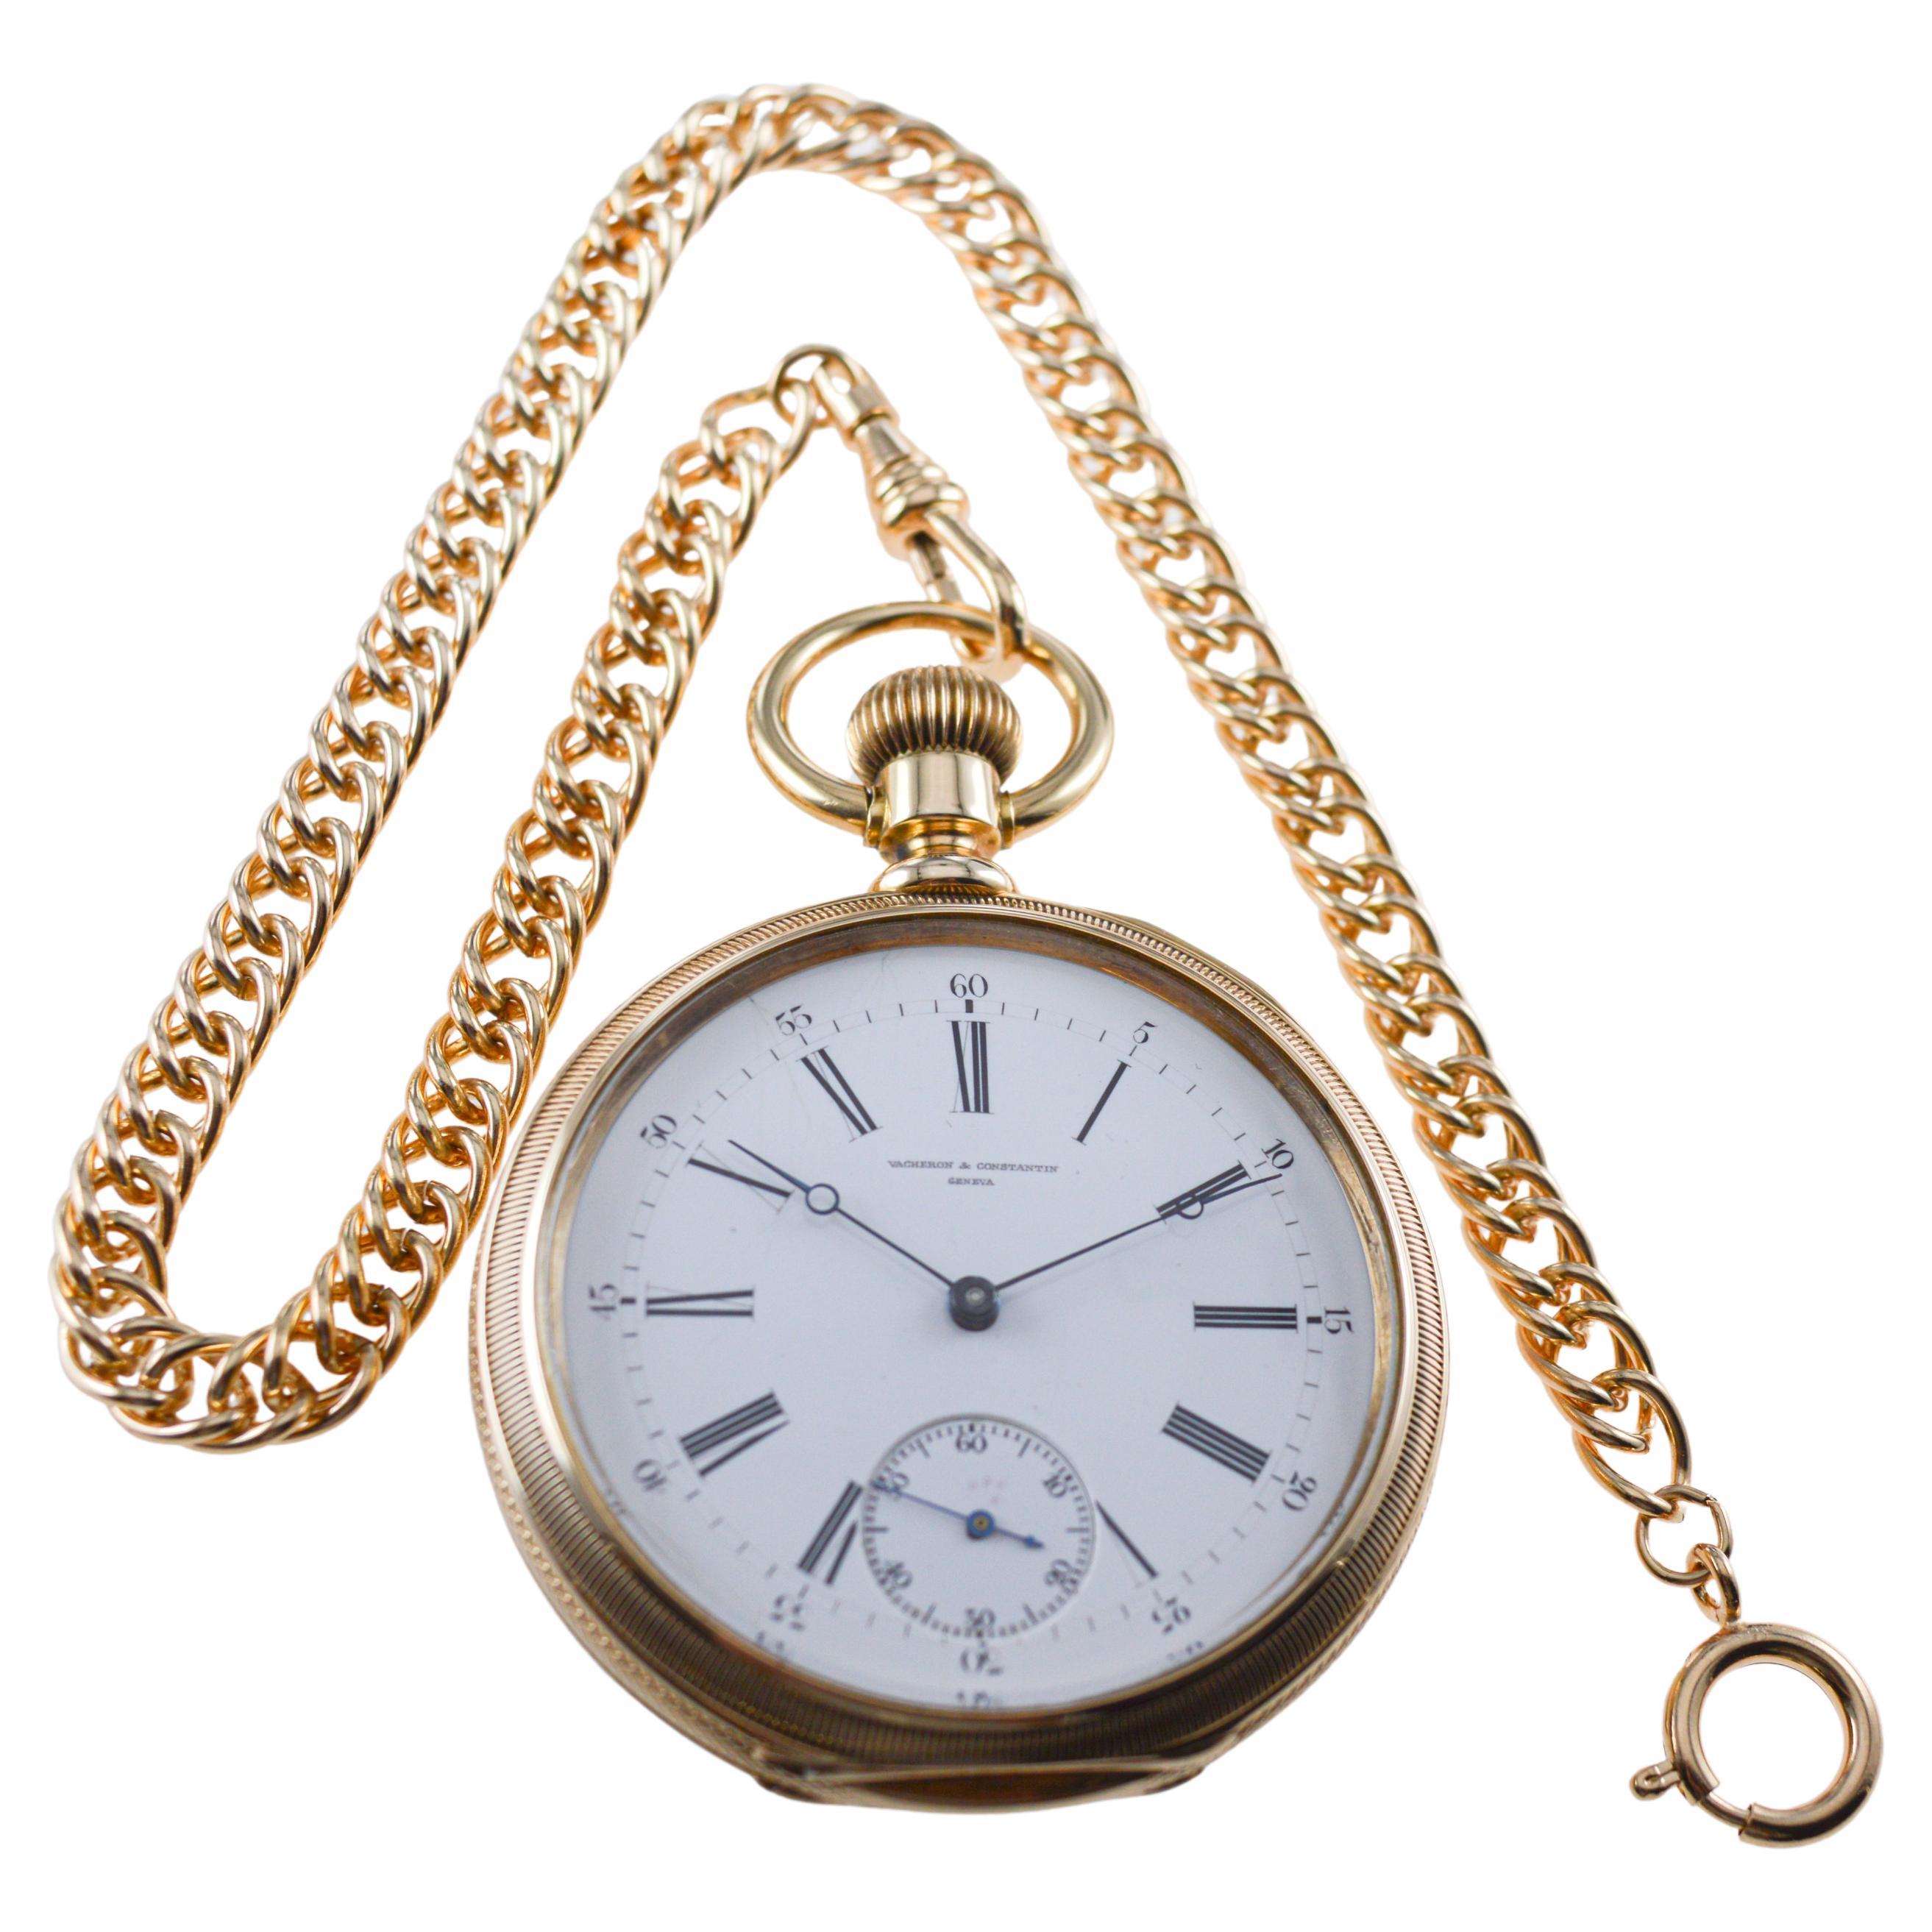 FACTORY / HOUSE: Vacheron & Constantin 
STYLE / REFERENCE: Open Faced Pocket Watch
METAL / MATERIAL: 18kt Rose Gold
CIRCA / YEAR: 1900's
DIMENSIONS / SIZE: Diameter 51mm
MOVEMENT / CALIBER: Manual Winding / 19 Jewels / Hinged Bezel, Lever Set
DIAL /